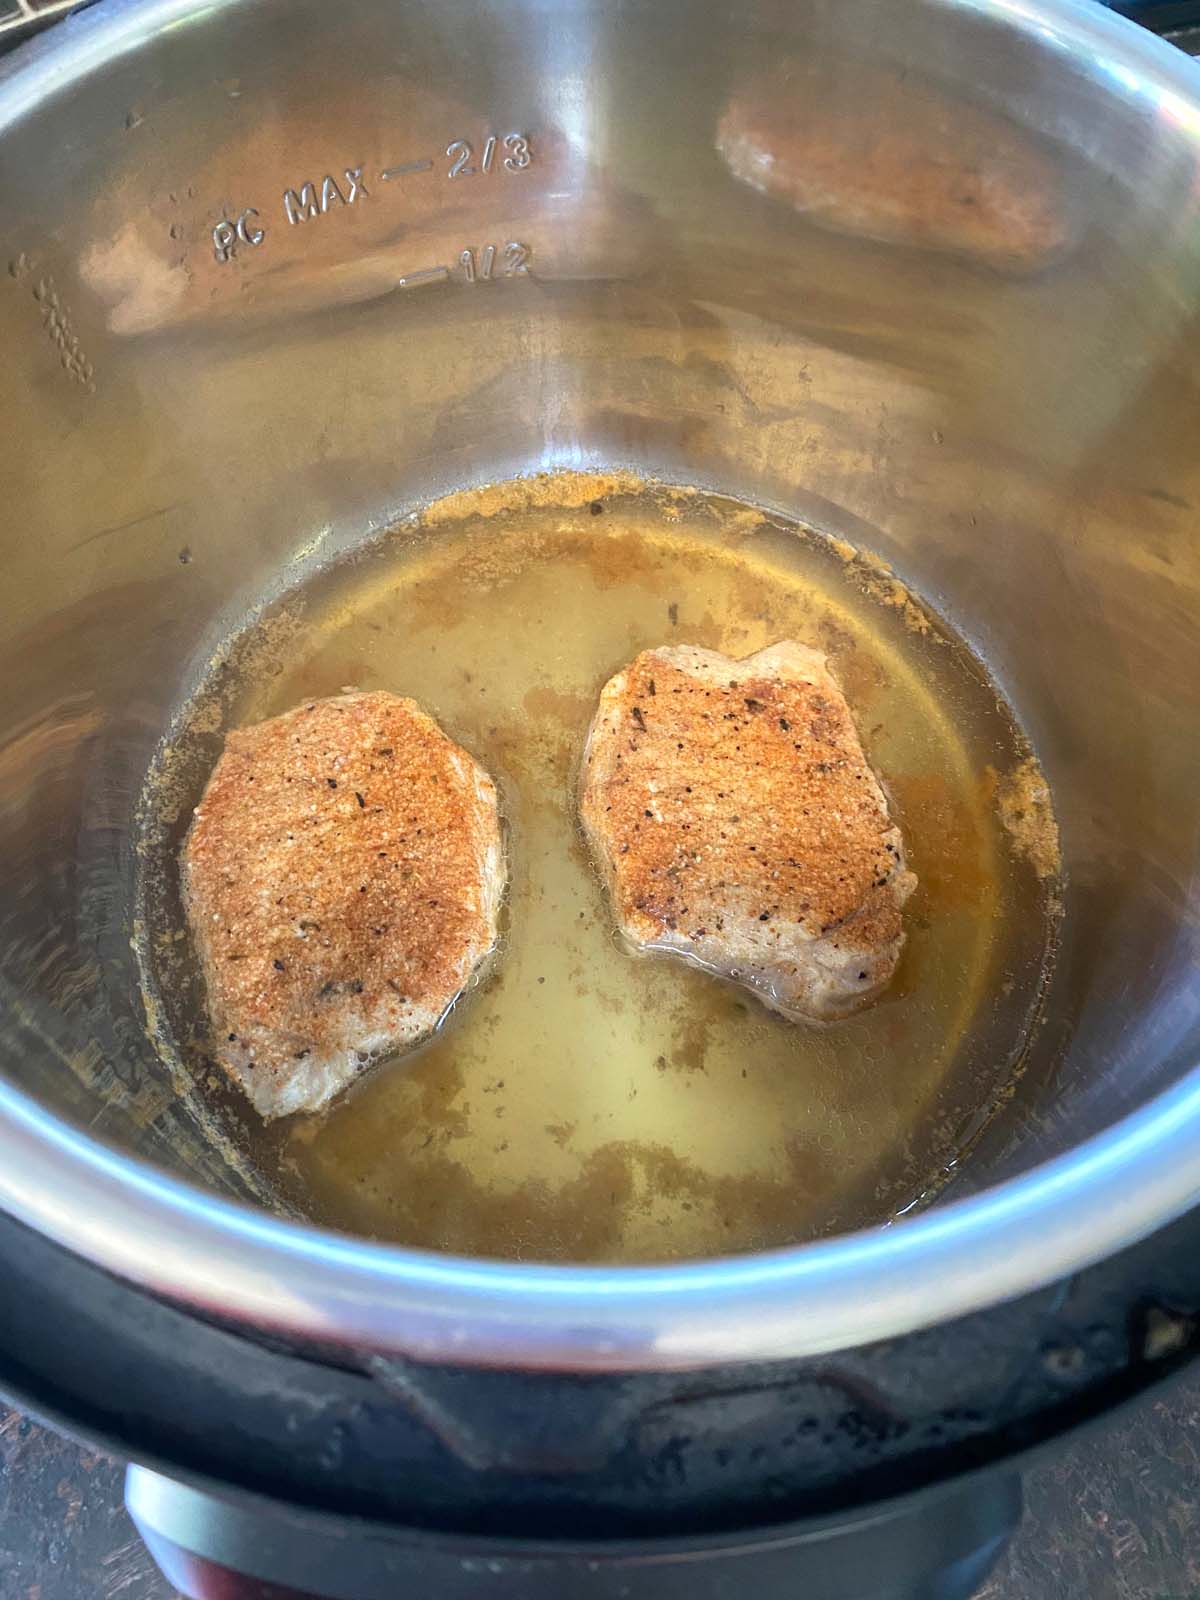 Chops after cooking sitting in water in the pressure cooker with seasonings.